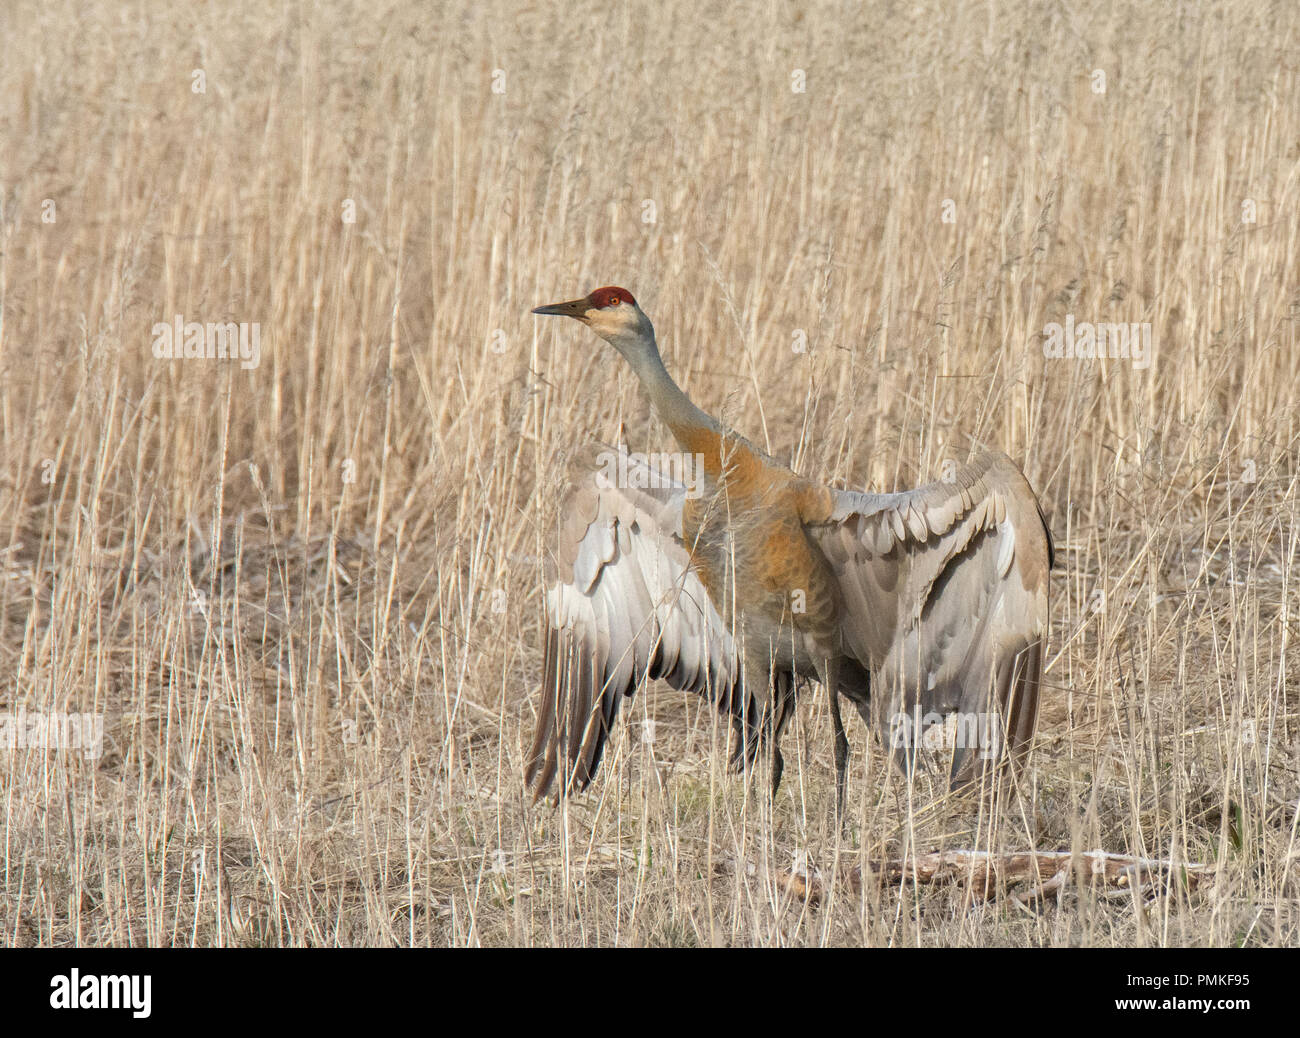 A sandhill crane stands tall with wings outstreched in a tall dry grassland. Stock Photo